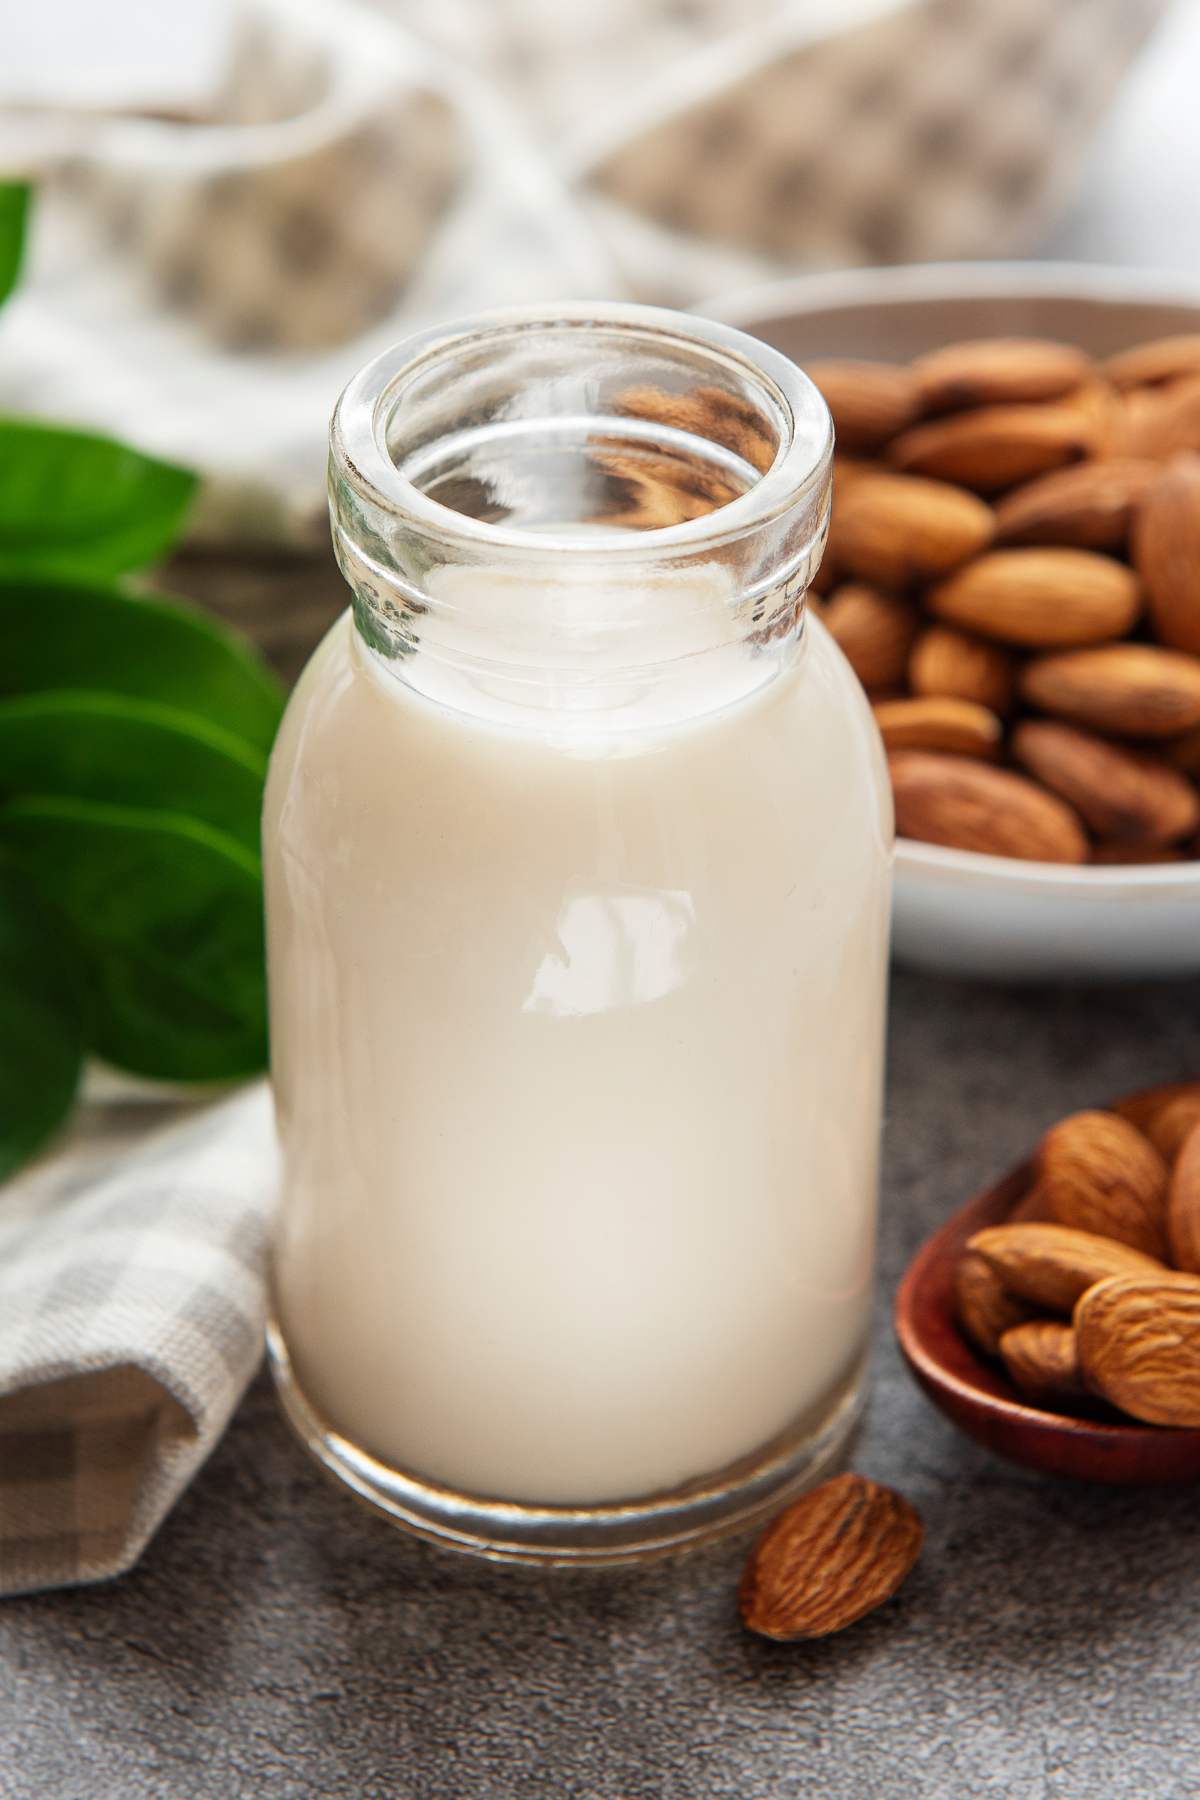 Wondering if you can have almond milk on a keto diet? How many net carbs are in a cup of almond milk? If you’re doing keto, keep reading to learn everything you need to know about this plant-based milk.